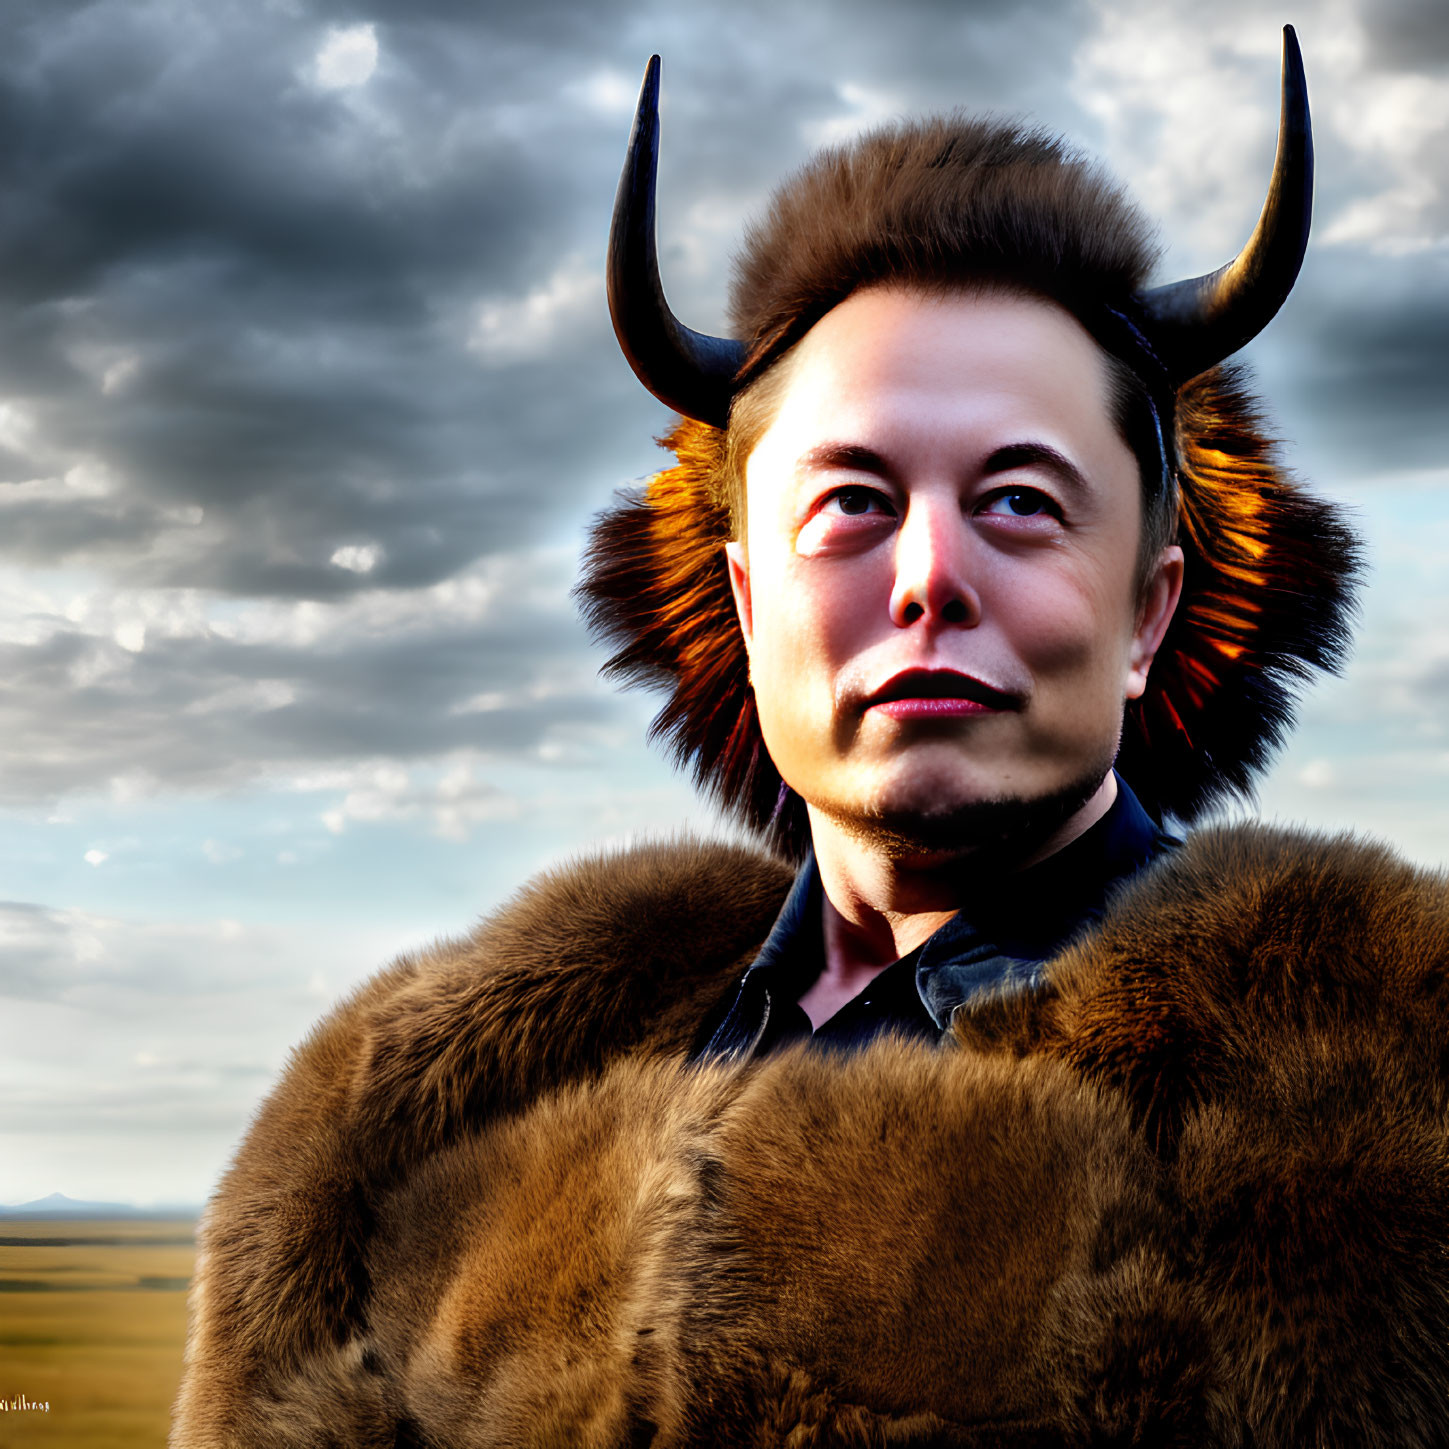 Serious person in costume with fur collar and horns under cloudy sky